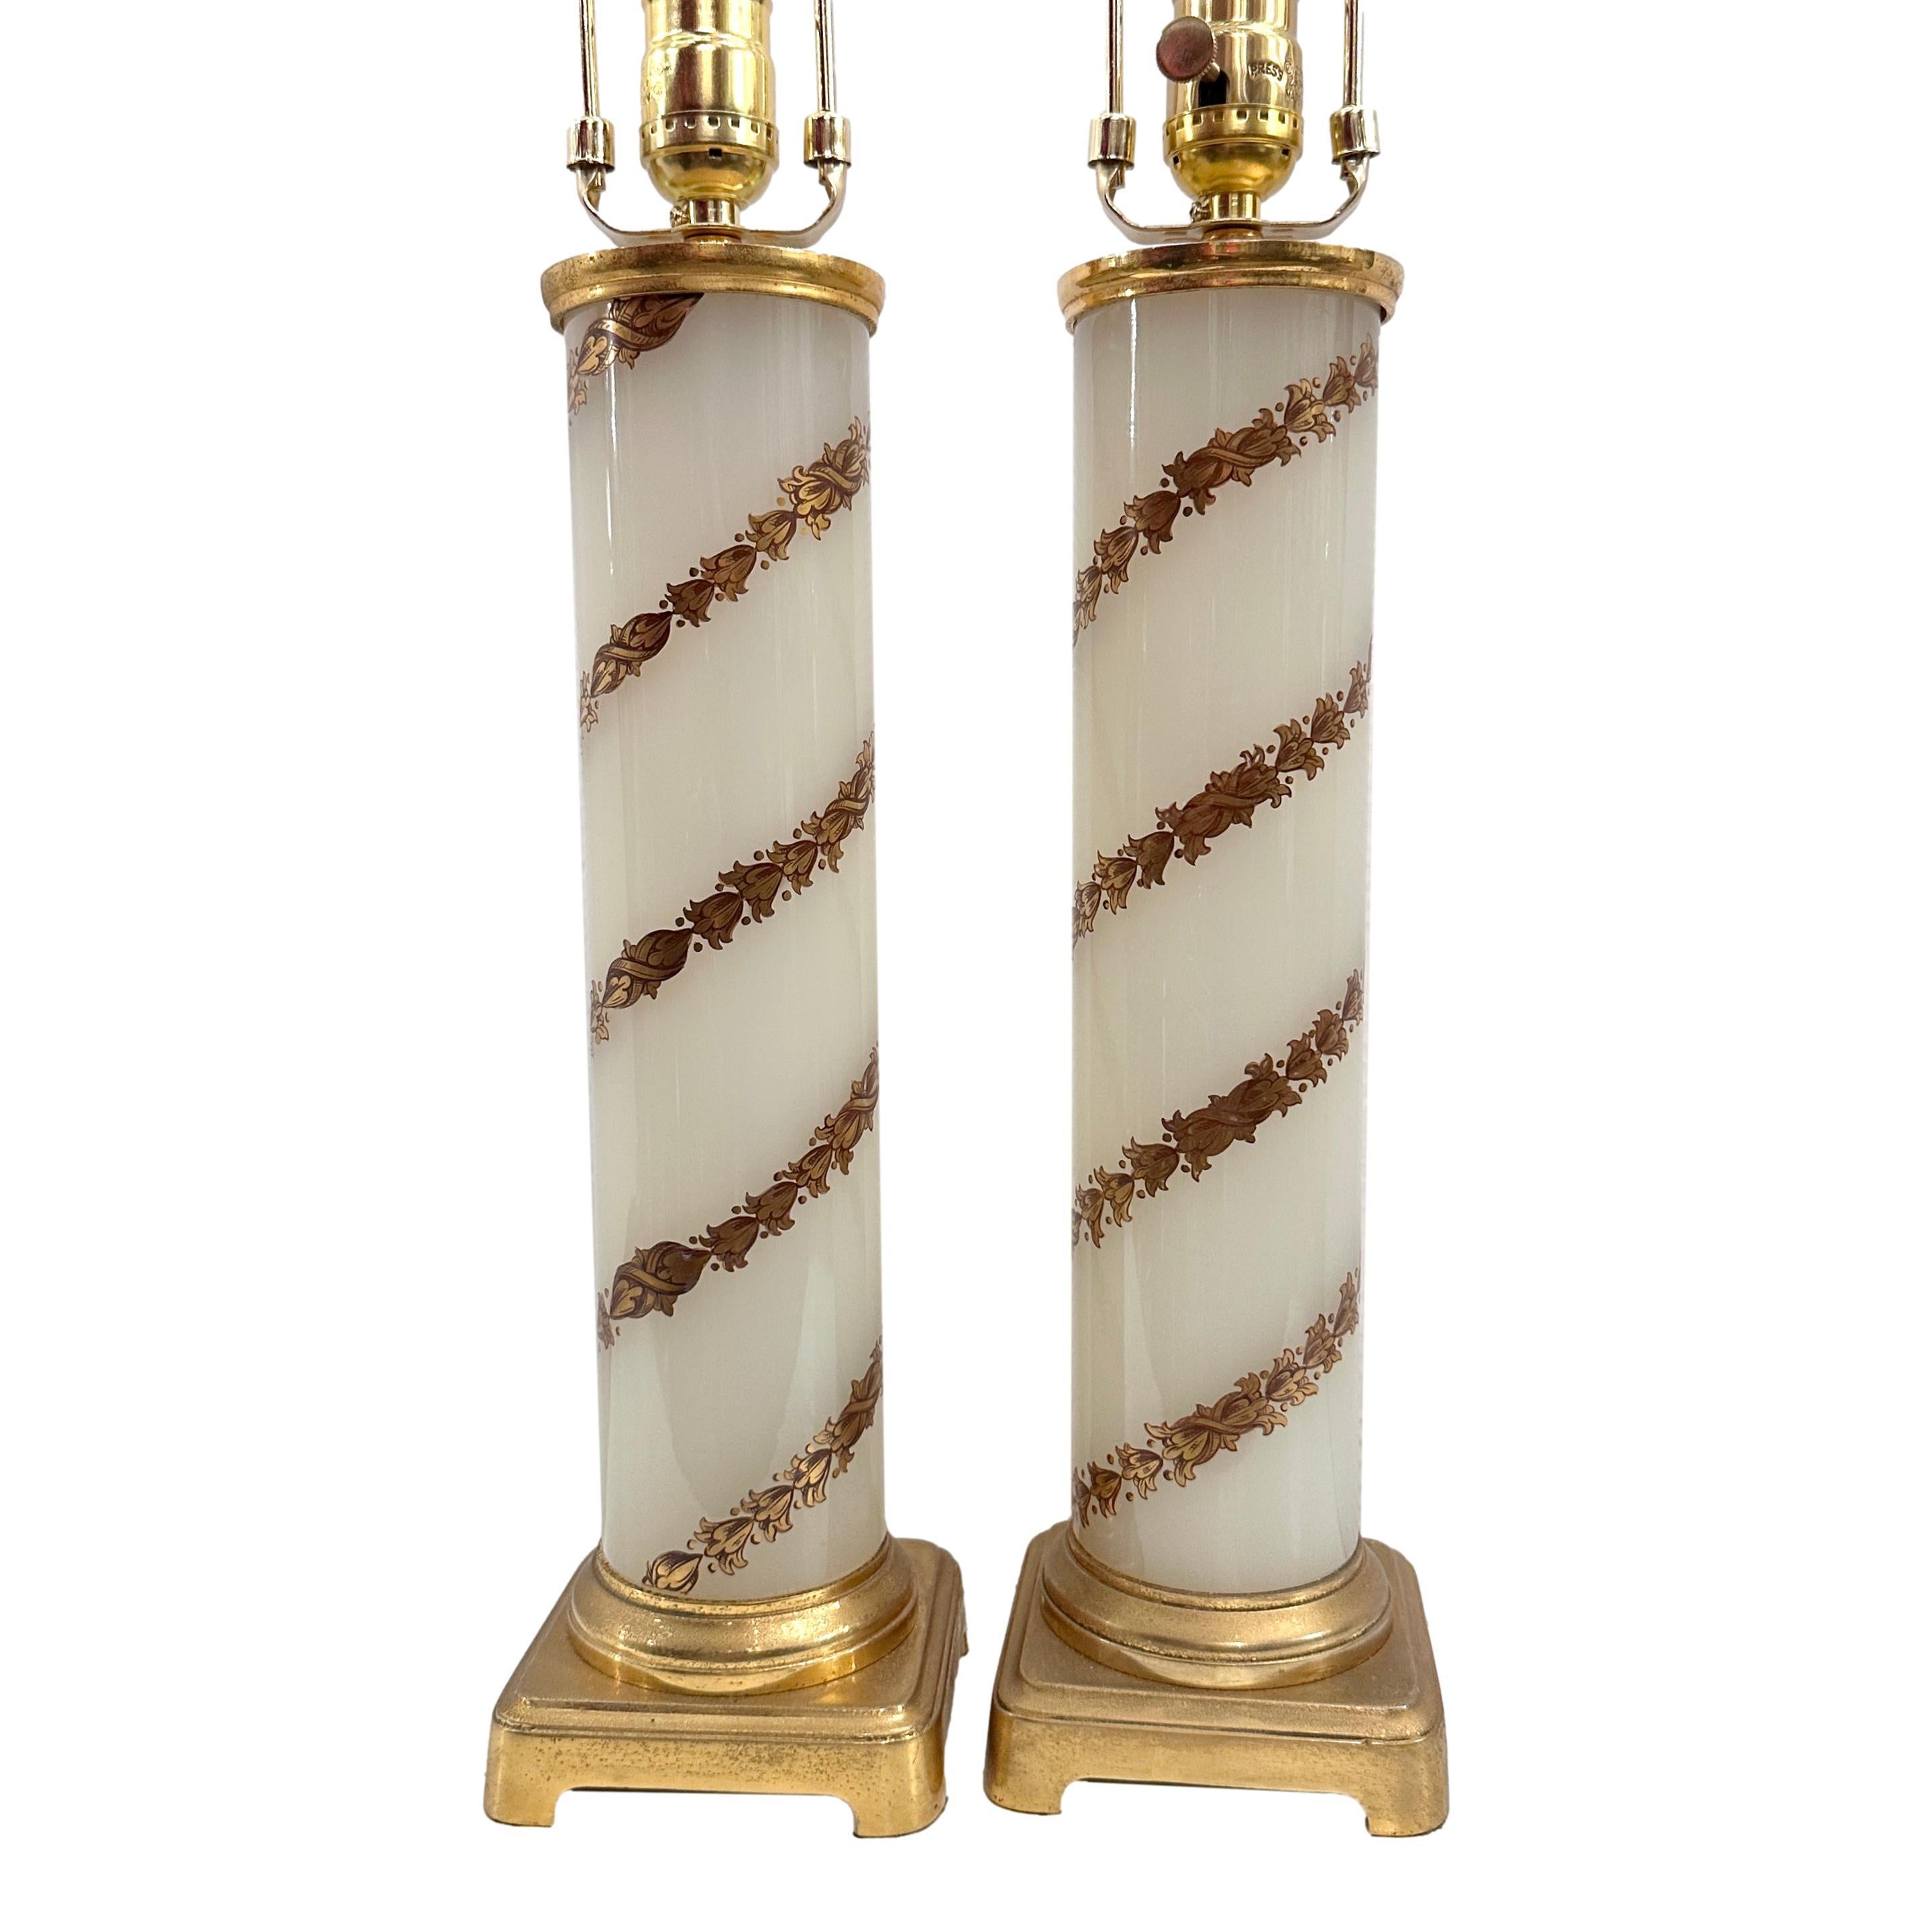 Pair of circa 1950's French white opaline lamps with gilt foliage decoration.

Measurements:
Height of body: 16